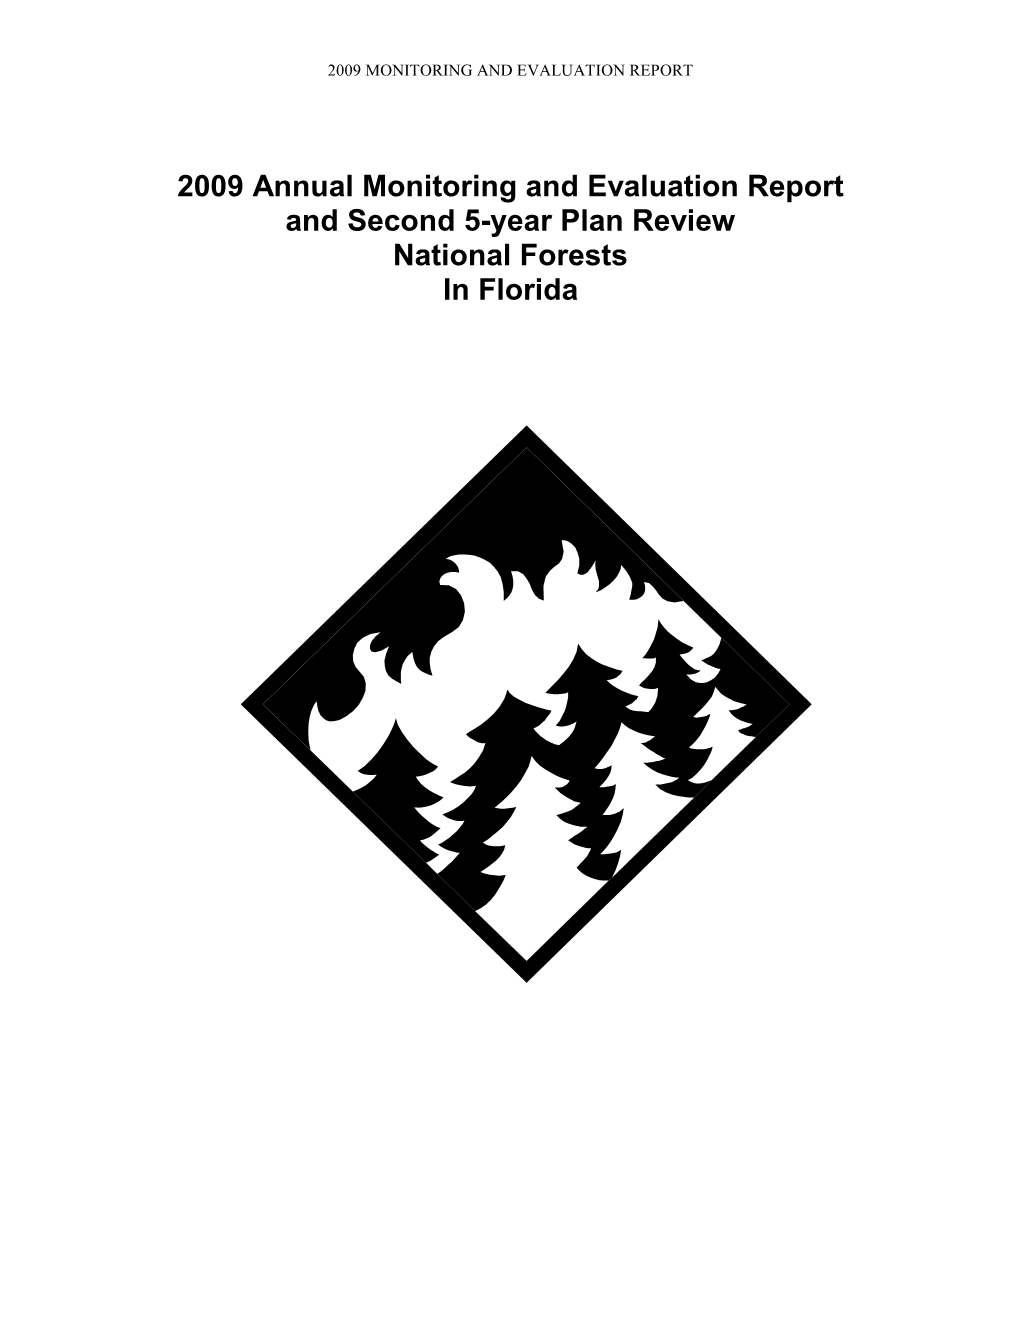 2009 Annual Monitoring and Evaluation Report and Second 5-Year Plan Review National Forests in Florida